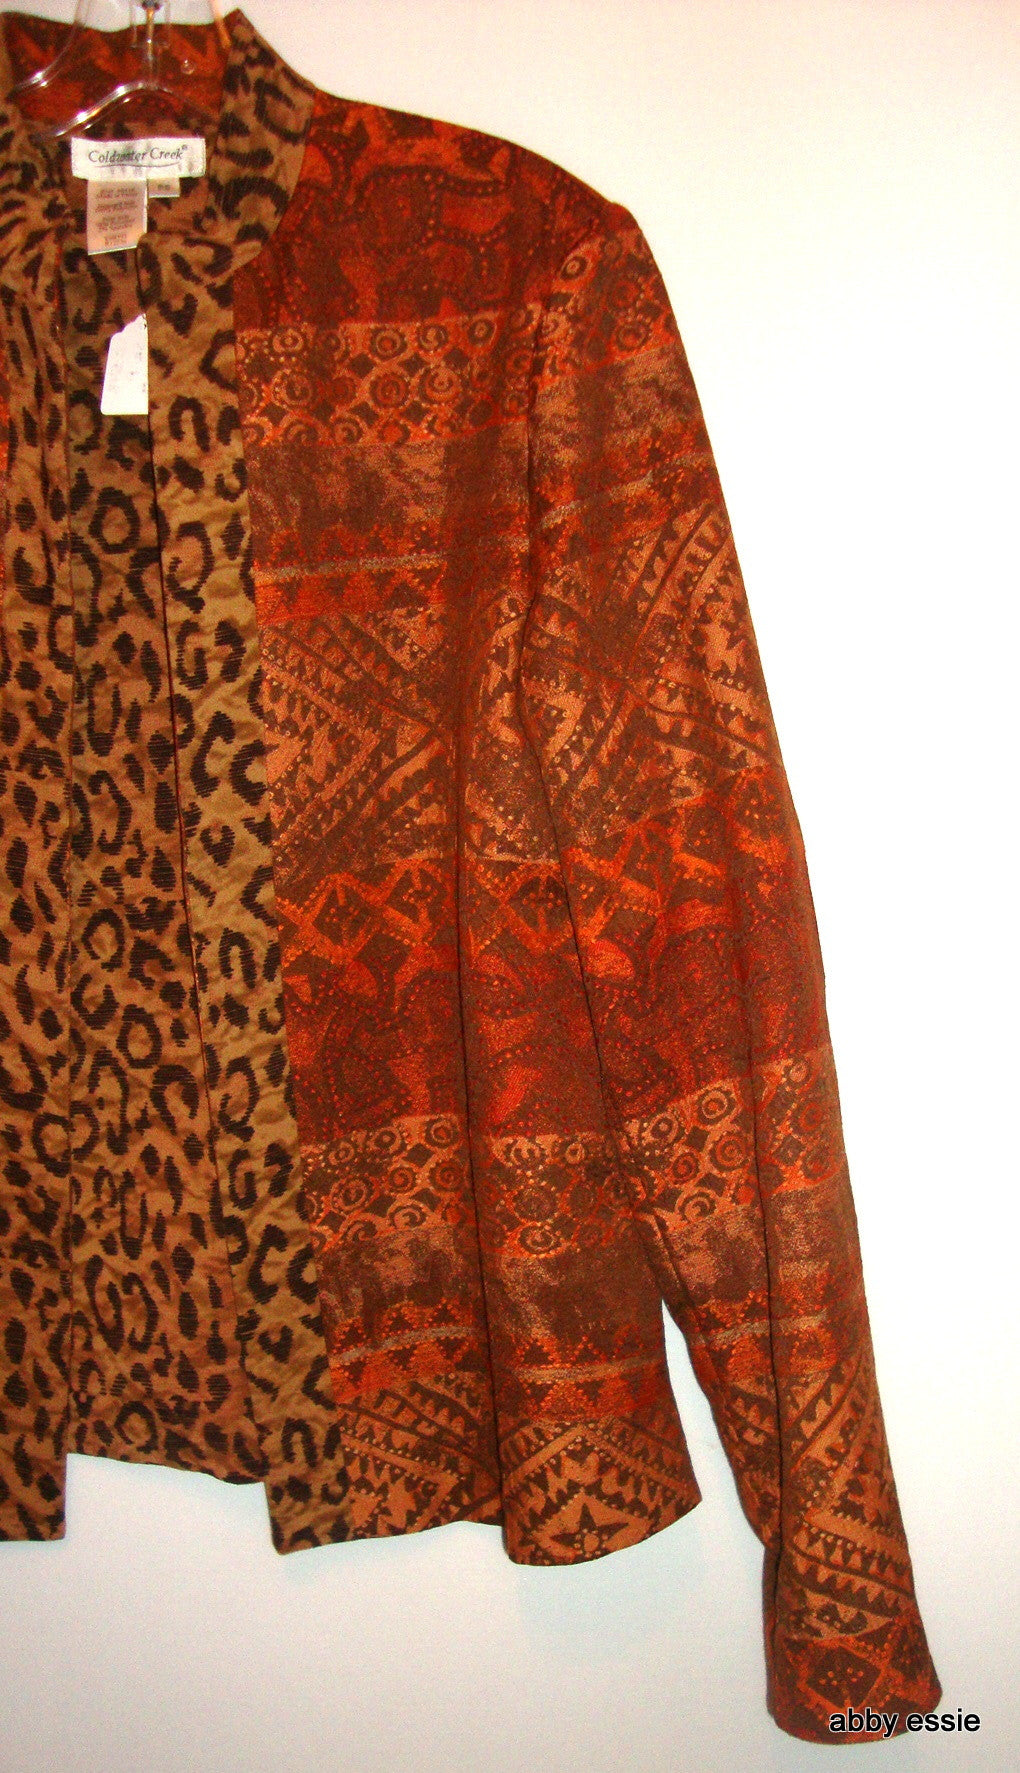 Coldwater Creek Reversible Jacquard/ Exotic Tapestry Jacket Small Abby Essie